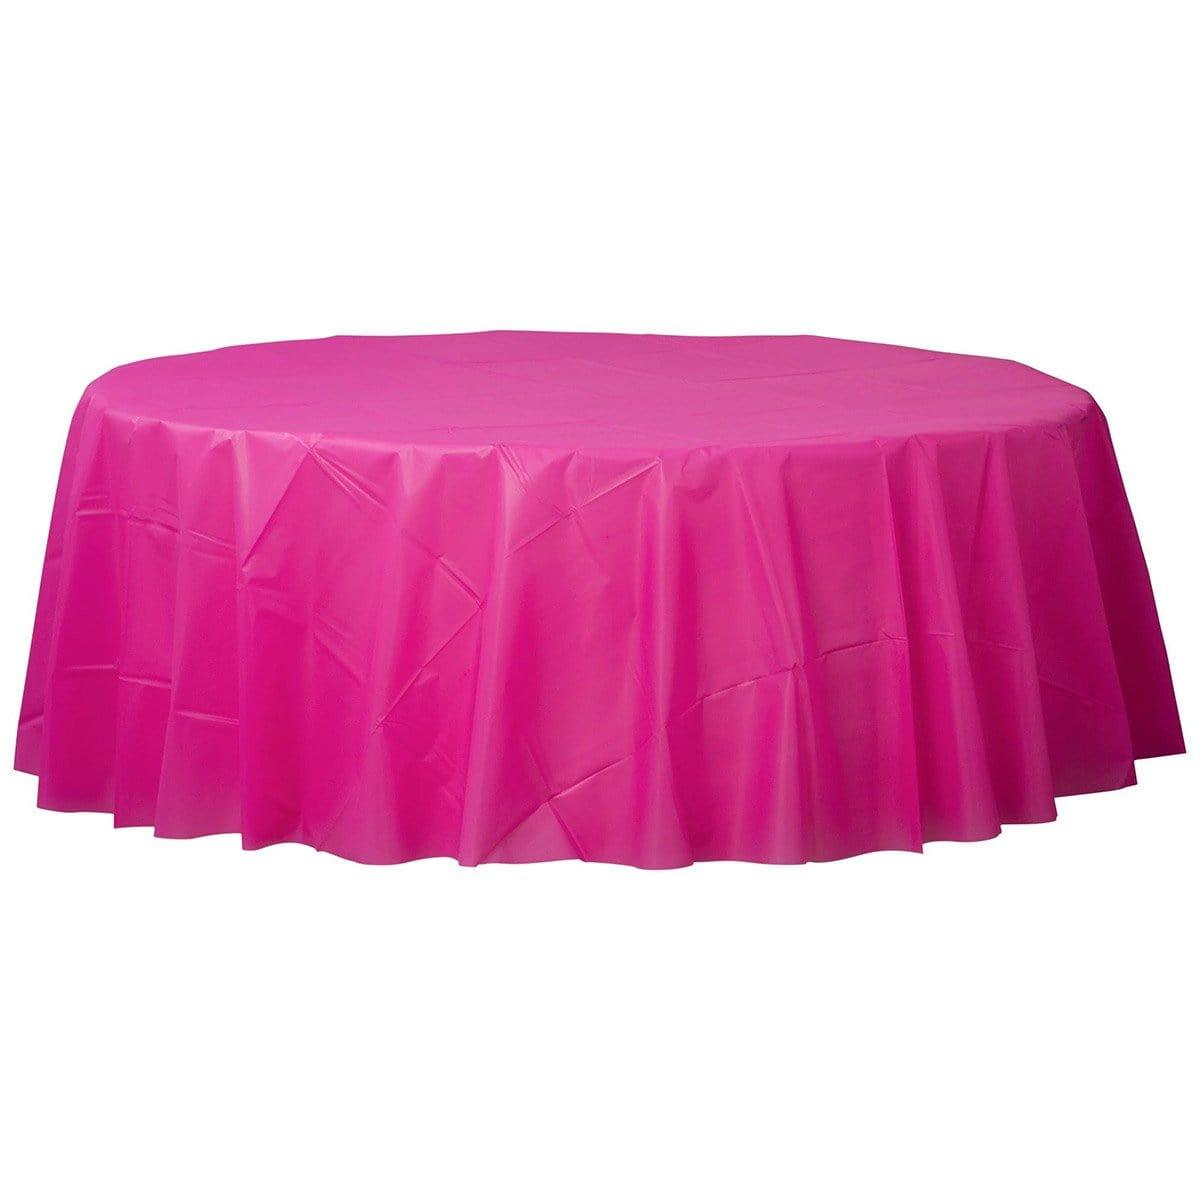 Buy plasticware Bright Pink Plastic Round Tablecover sold at Party Expert